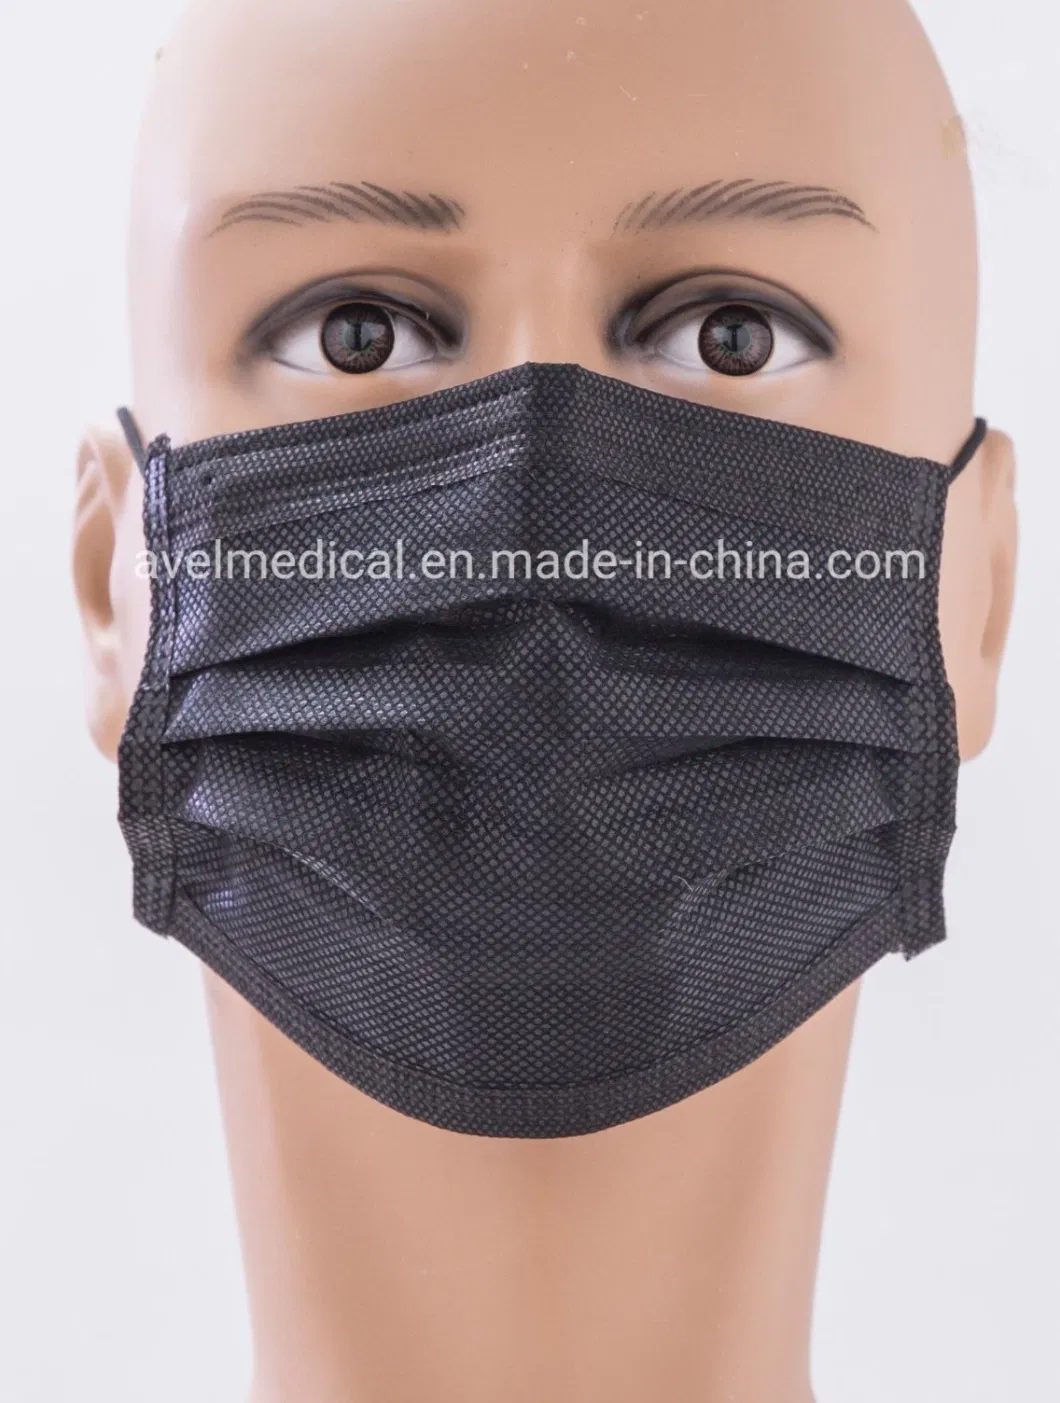 Wholesale CE FDA Standard KN95 N95 FFP2 FFP3 Face Masks Fashion Non-Woven Disposable Medical Supply Surgical Dust Facial Mask 3ply 4ply Protective Face Mask